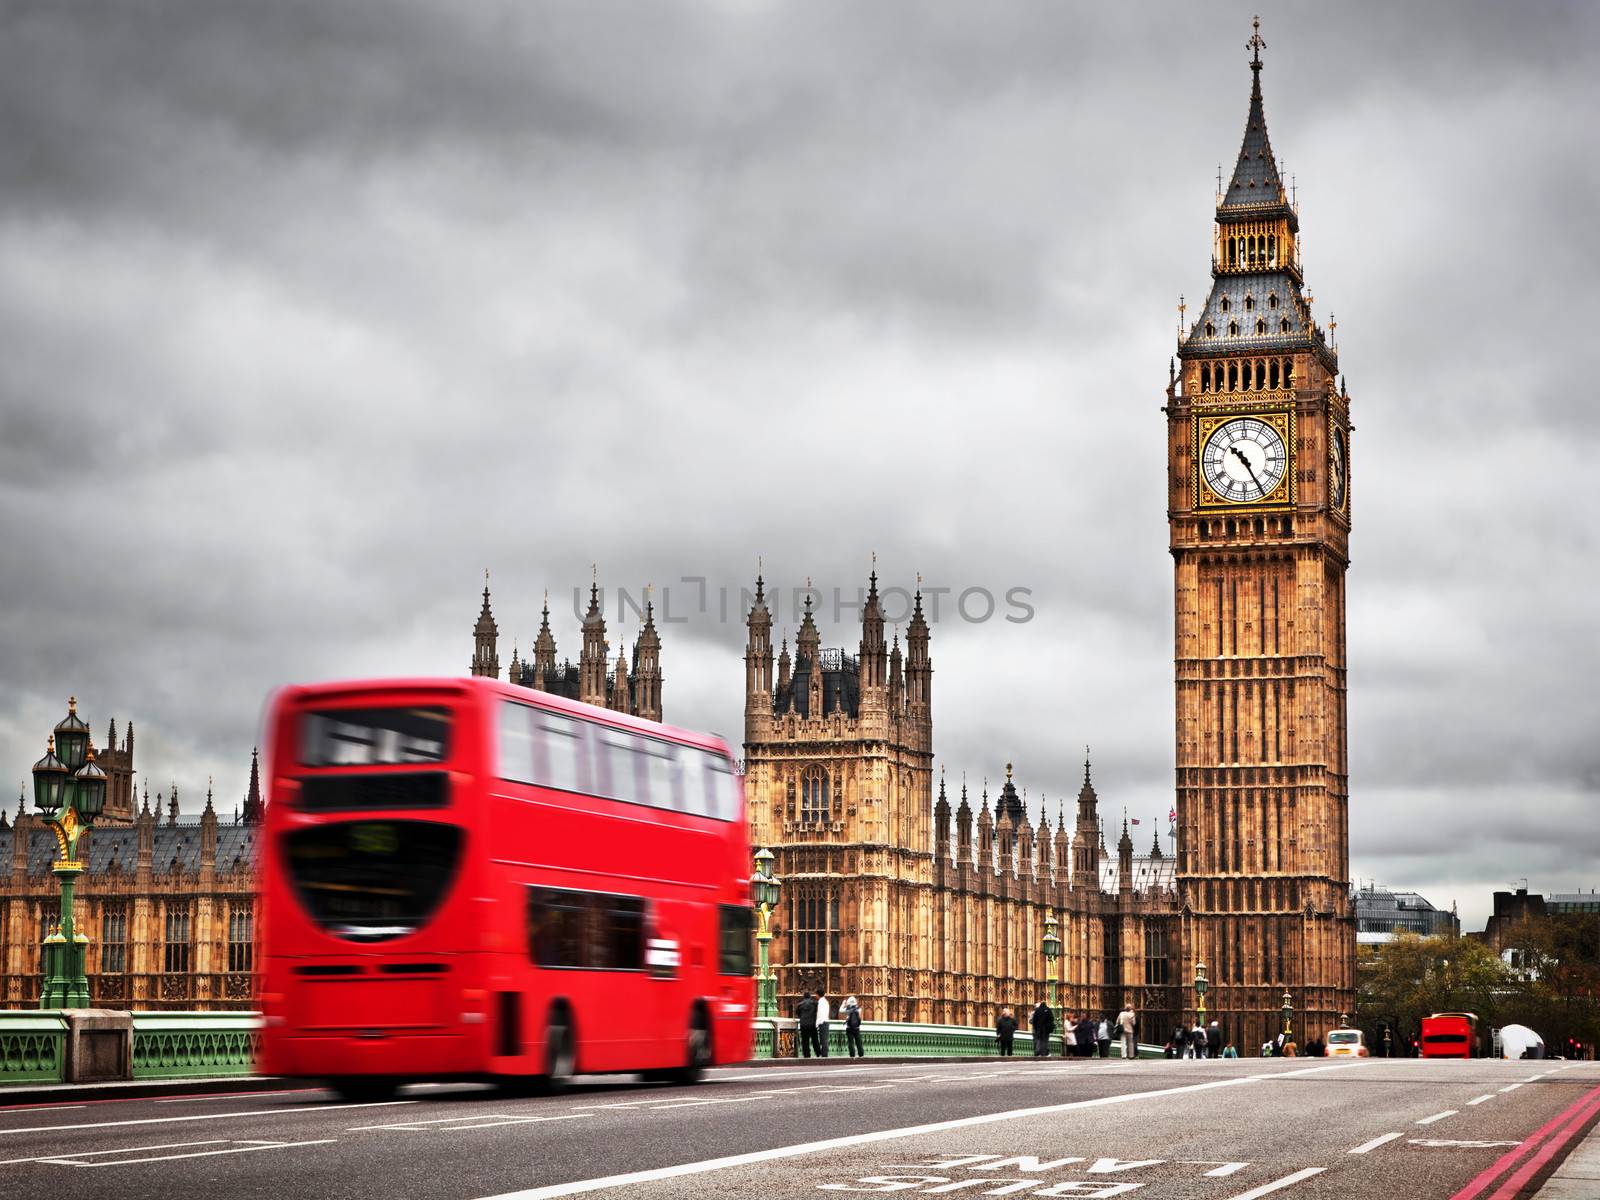 London, the UK. Red bus in motion and Big Ben, the Palace of Westminster. The icons of England in vintage, retro style